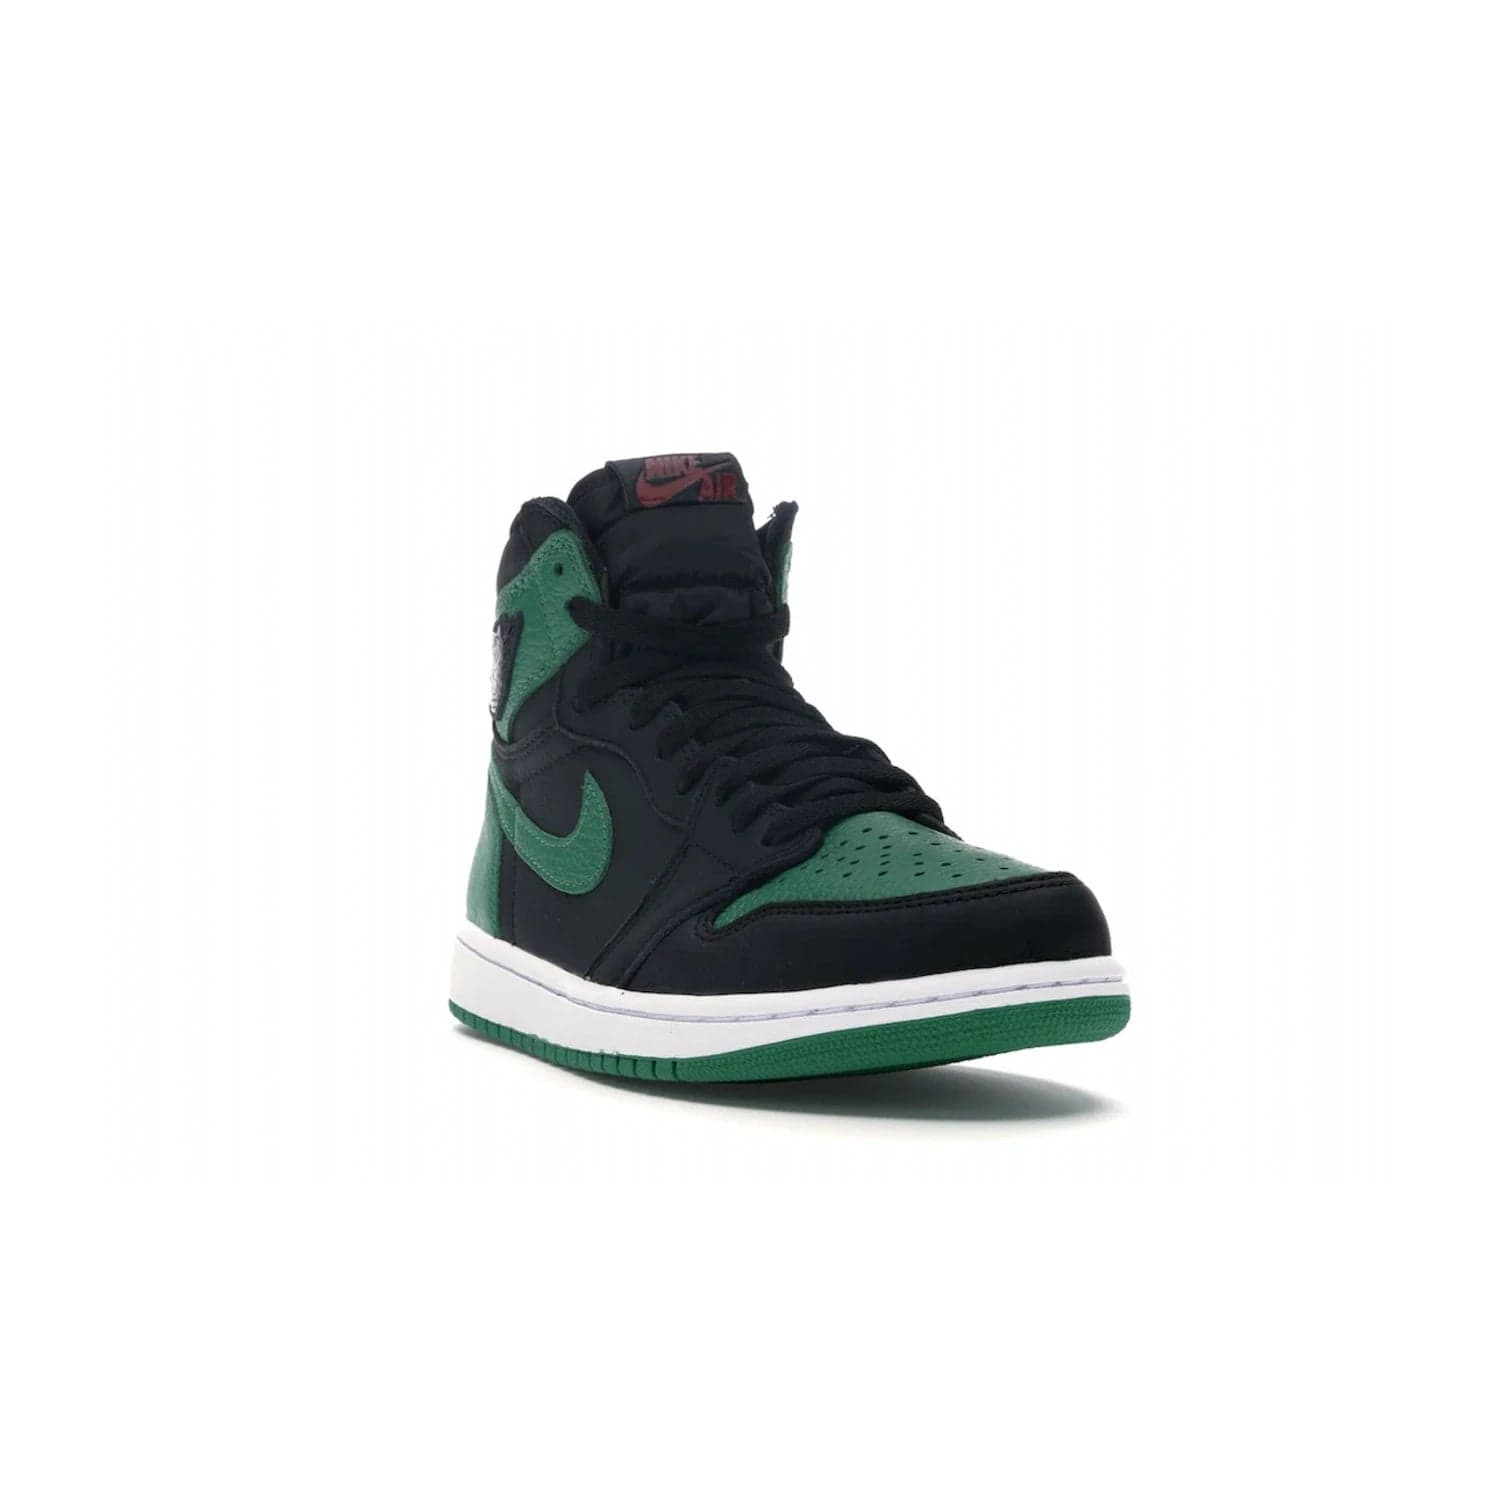 Jordan 1 Retro High Pine Green Black - Image 7 - Only at www.BallersClubKickz.com - Step into fresh style with the Jordan 1 Retro High Pine Green Black. Combining a black tumbled leather upper with green leather overlays, this sneaker features a Gym Red embroidered tongue tag, sail midsole, and pine green outsole for iconic style with a unique twist.